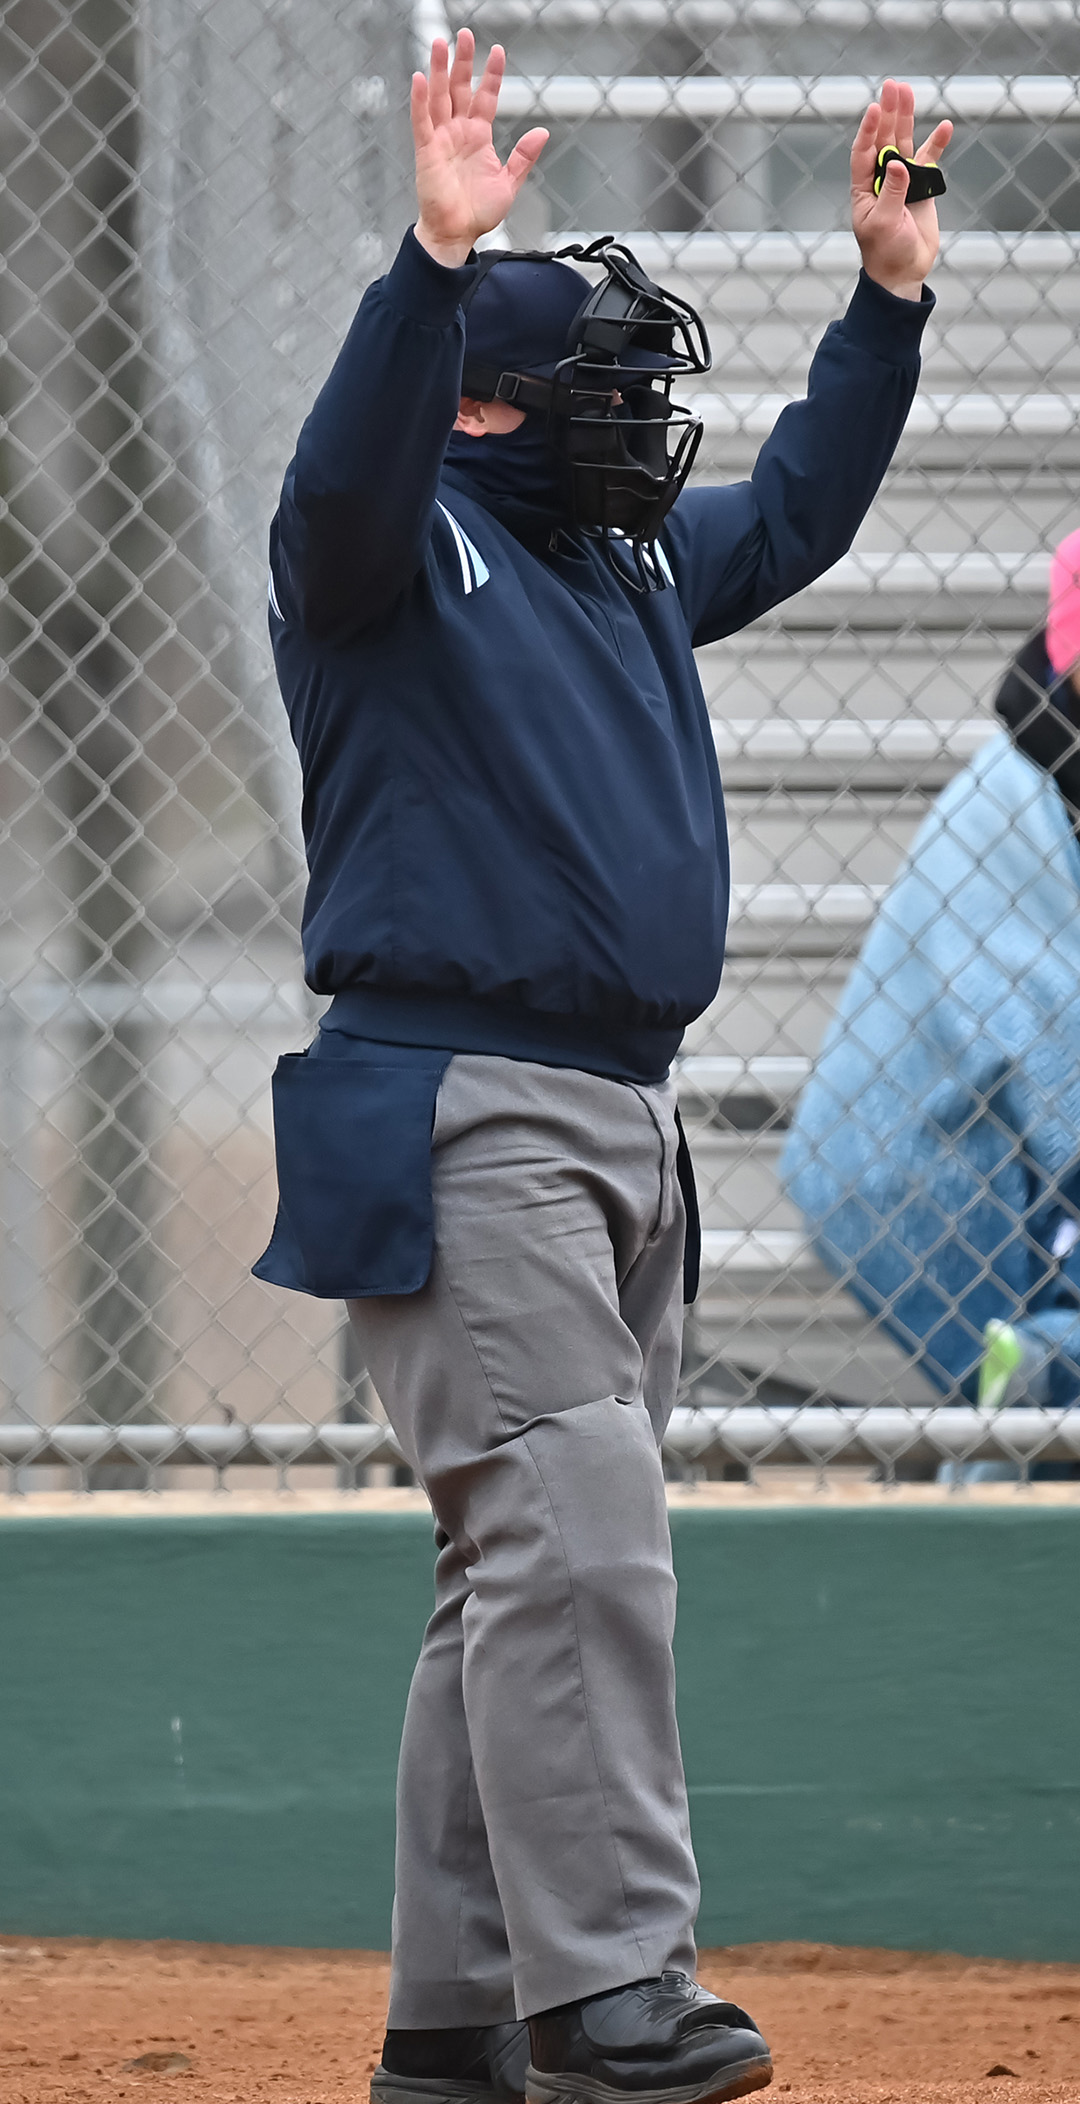 An umpire with both hands up in the air.